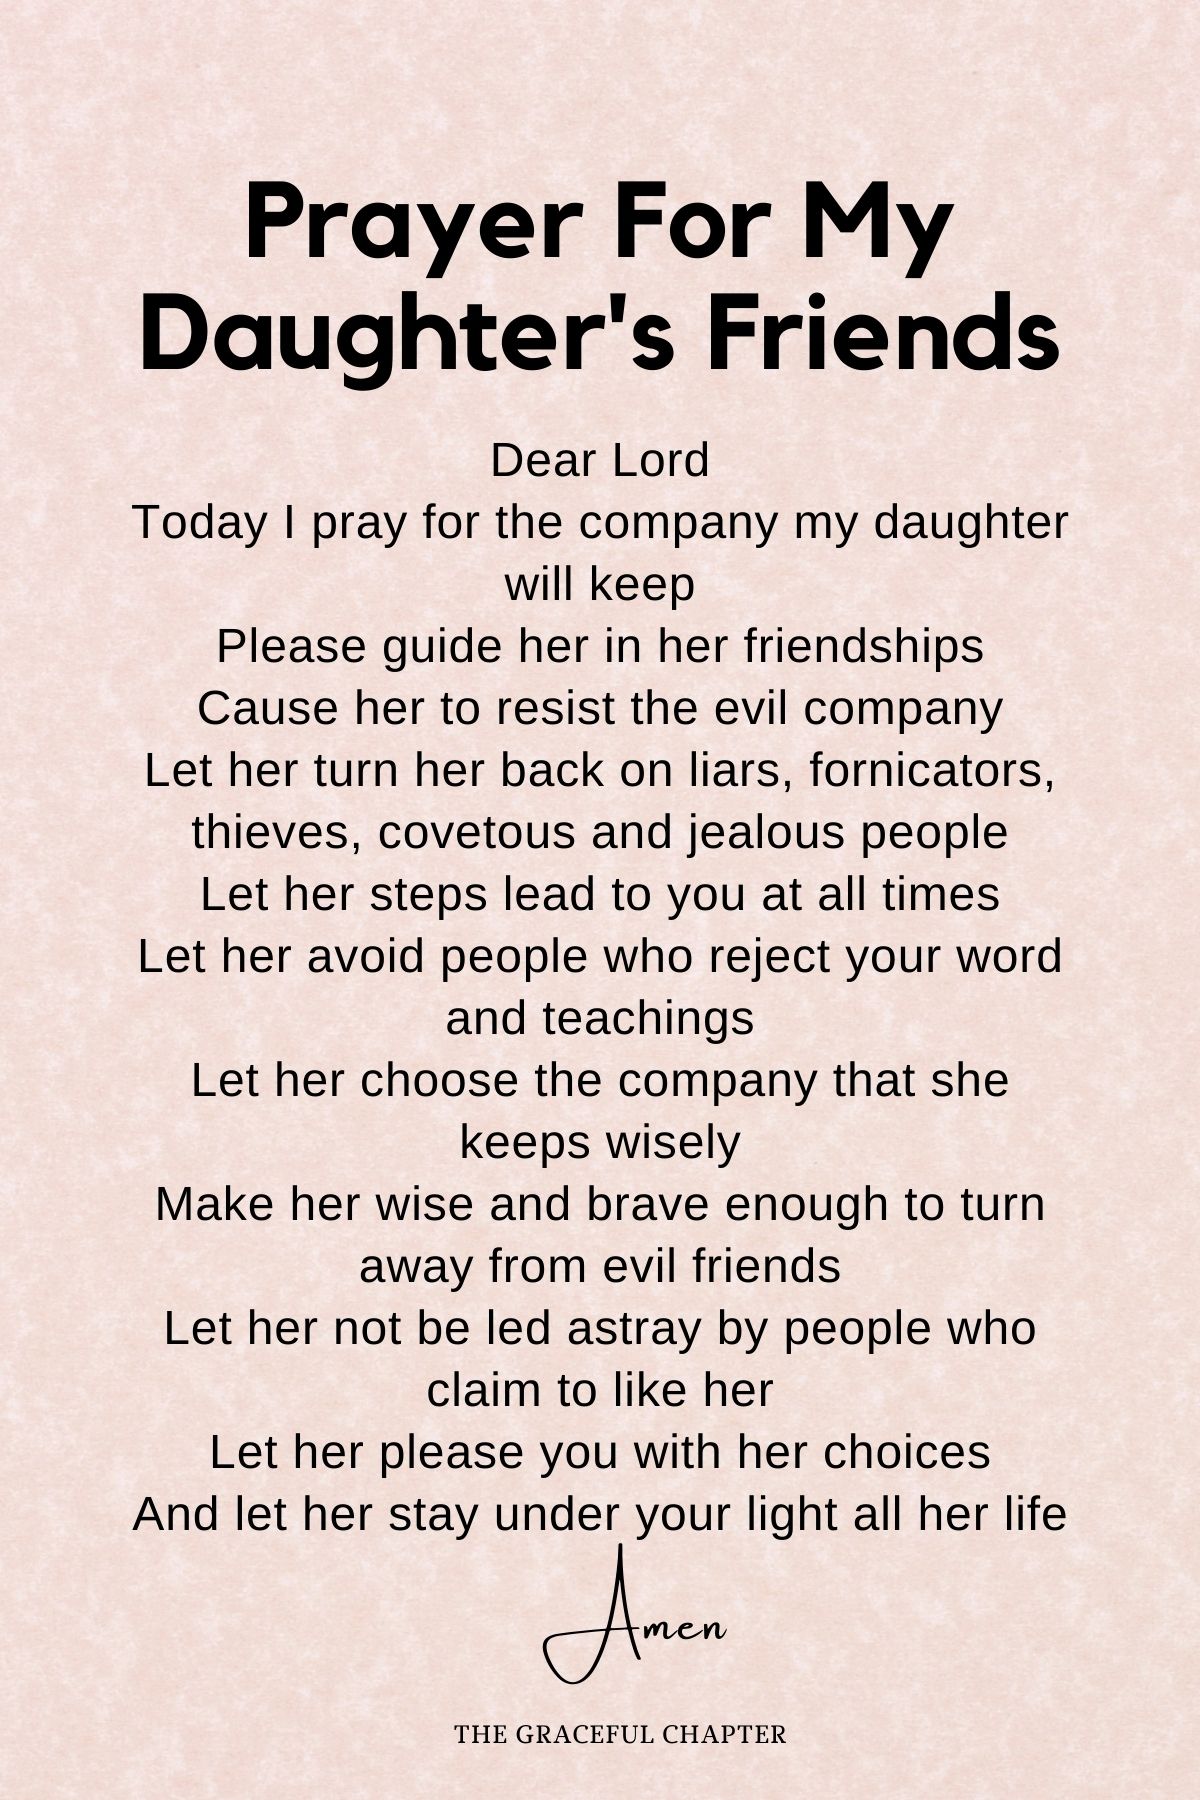 Prayer for my daughter's friends